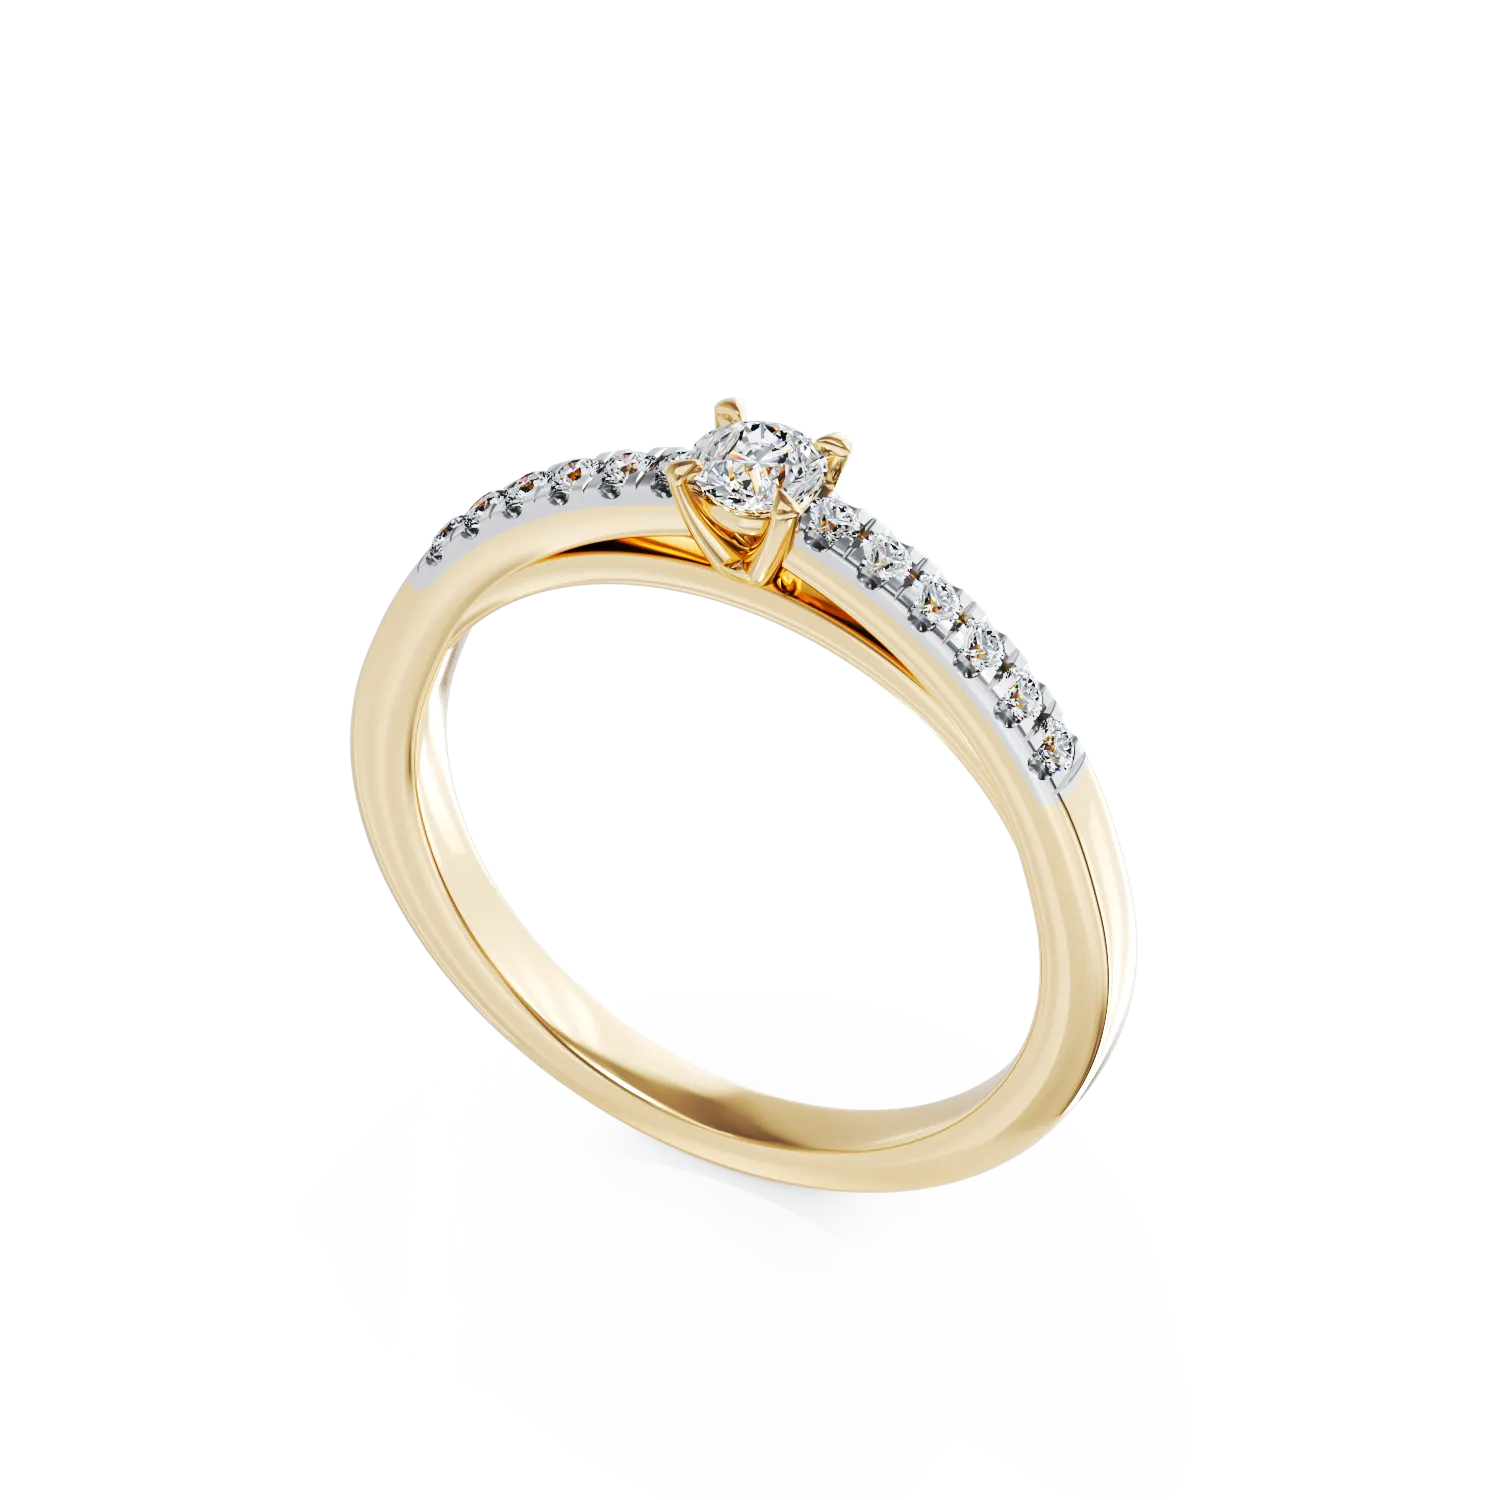 18K yellow gold engagement ring with 0.33ct diamond and 0.13ct diamonds